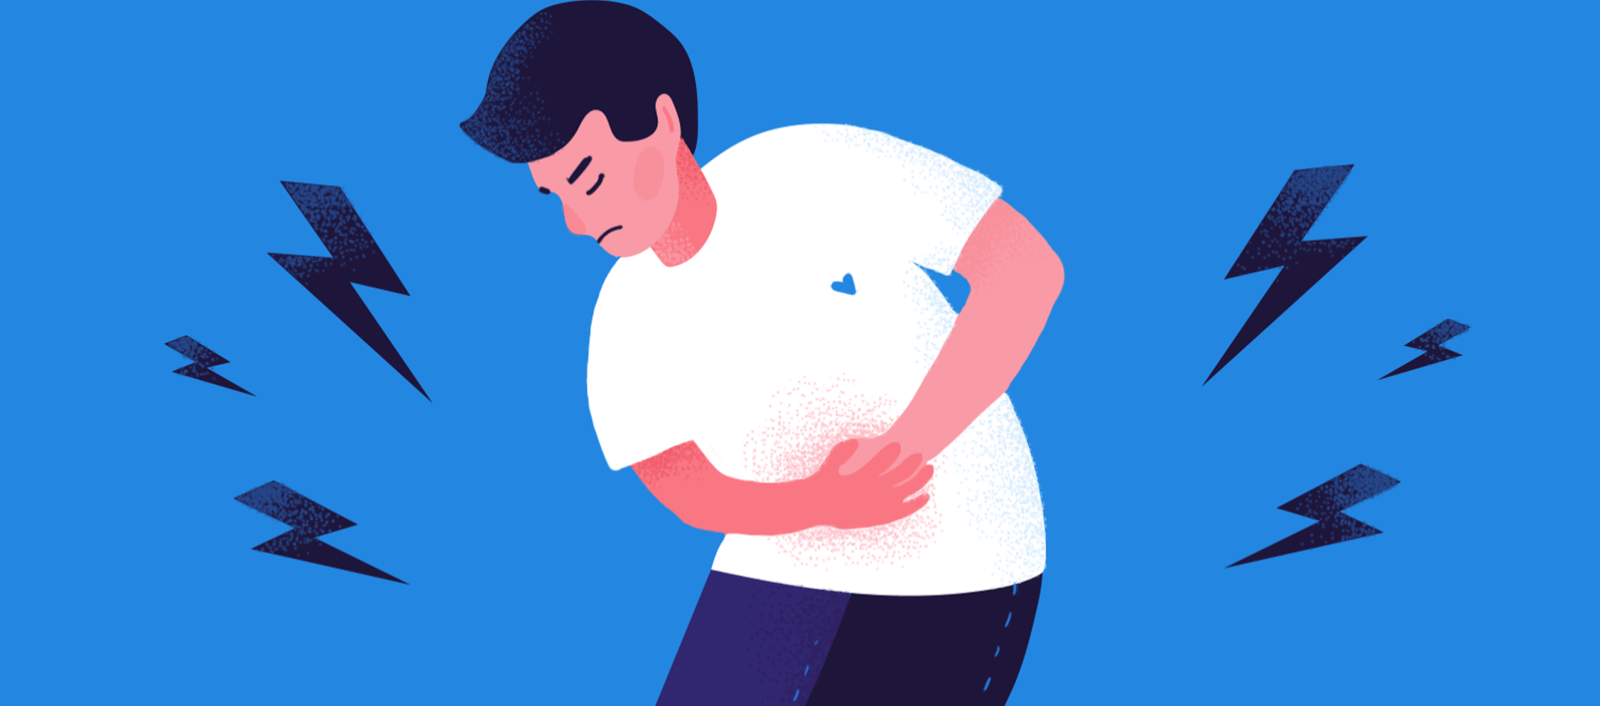 Abdominal or stomach pain at night: Common causes and prevention